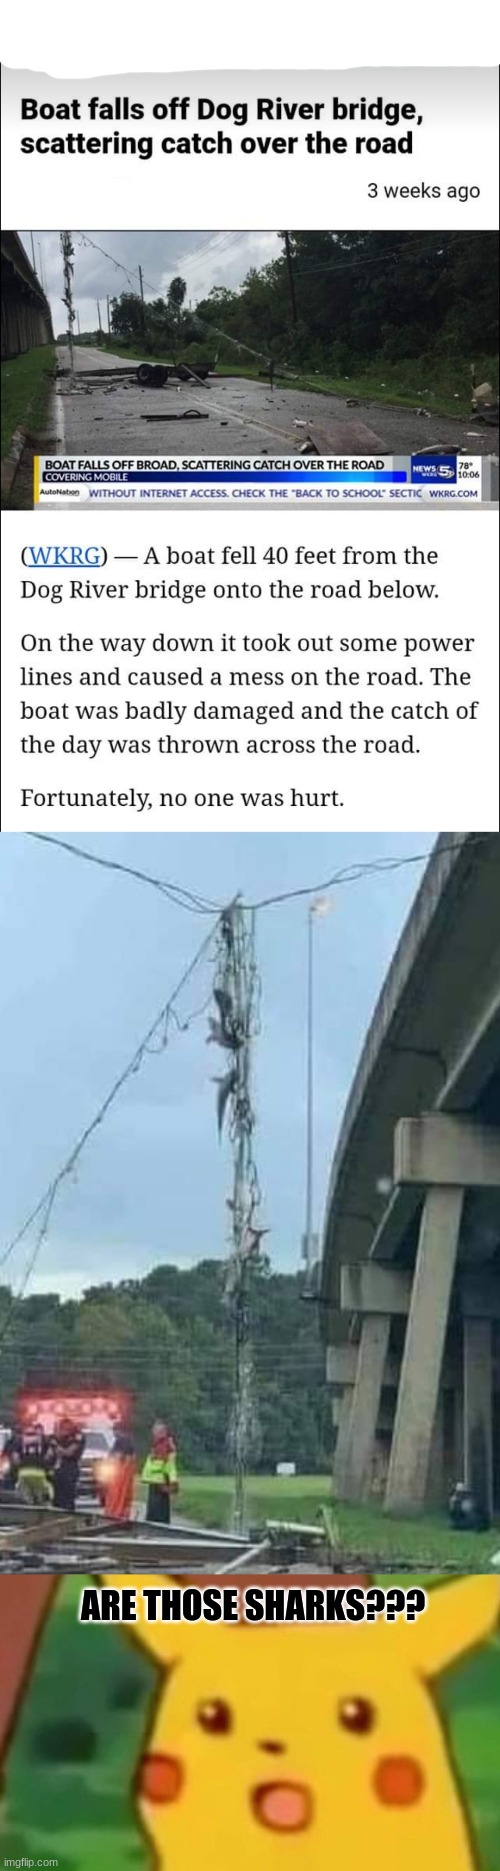 Sharks caught in power lines | ARE THOSE SHARKS??? | image tagged in memes,surprised pikachu,sharks,news headlines,what,how | made w/ Imgflip meme maker